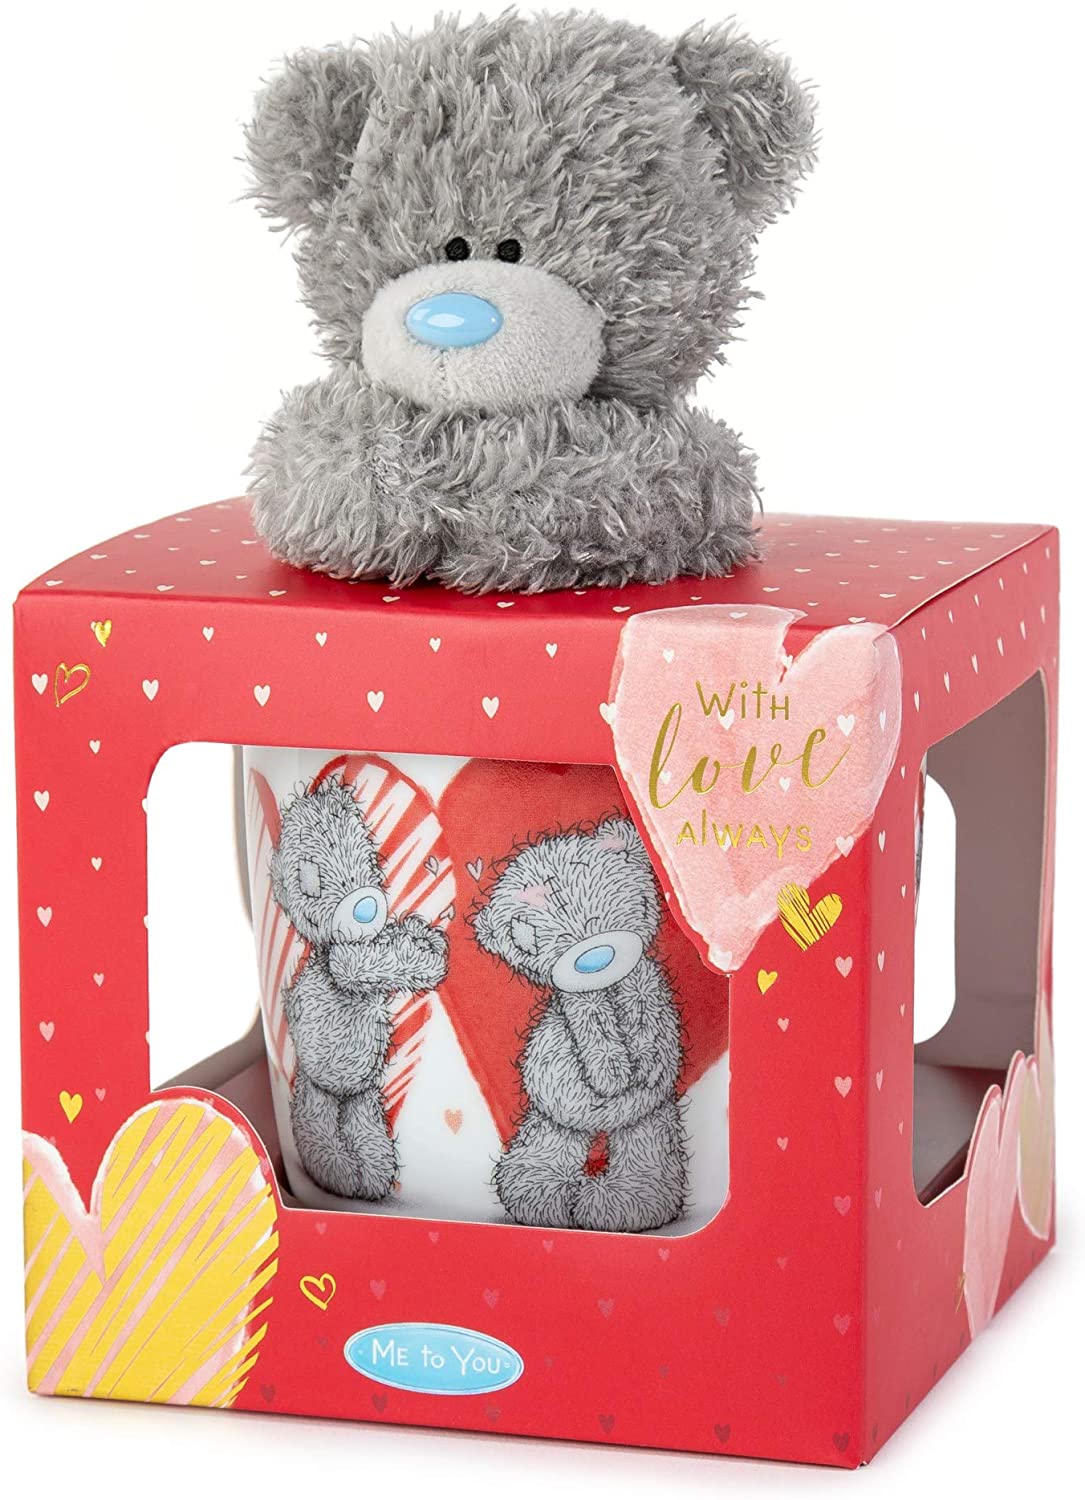 Tatty Teddy Soft Toy with 'In Love' Mug in a Gift Box